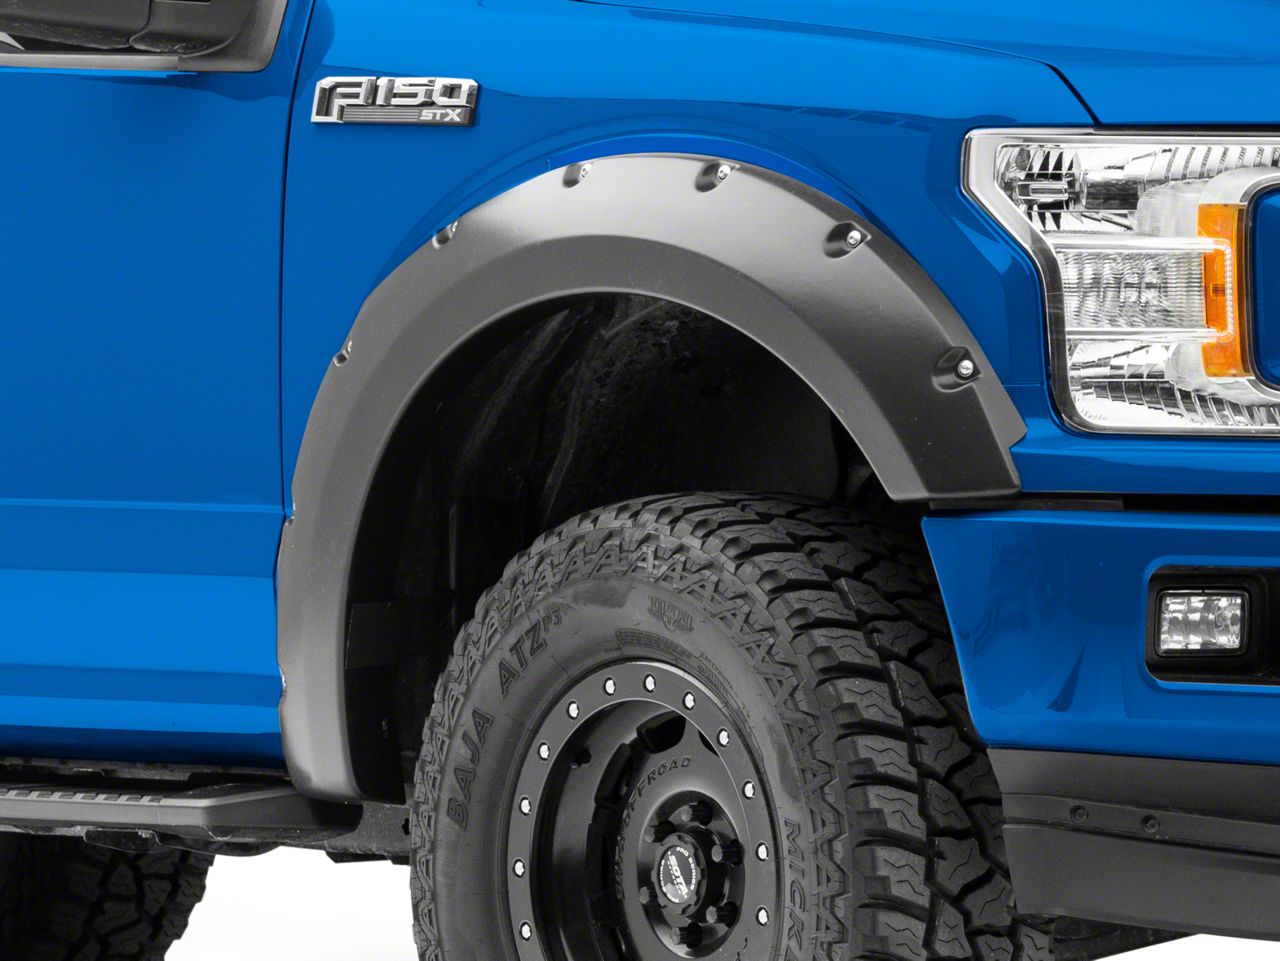 Pocket Riveted Style in Paintable Smooth Matte Black Incompatible with Lane Keeping Sensors 4 Piece Set Galaxy Auto Fender Flares for 2018-20 Ford F150 